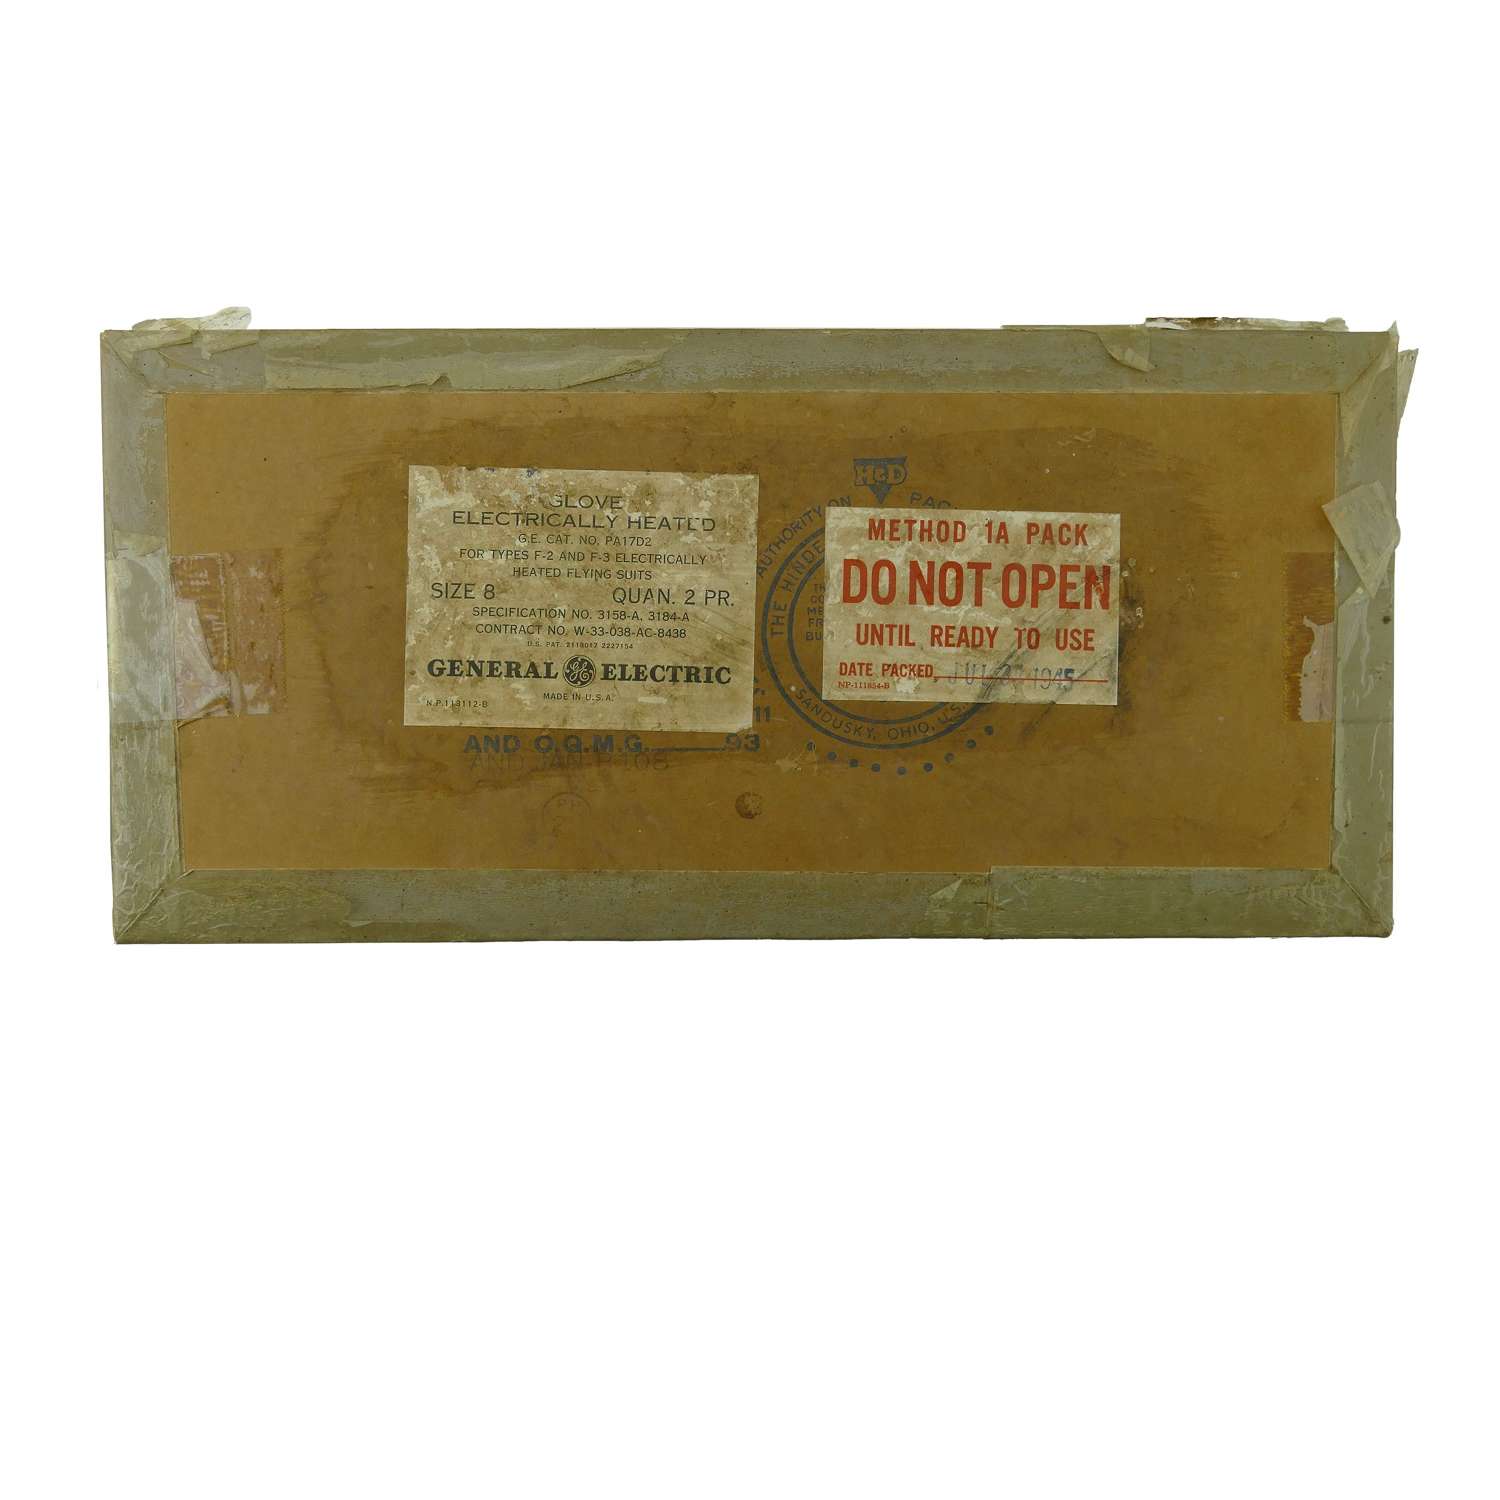 USAAF electrically heated flying gloves box